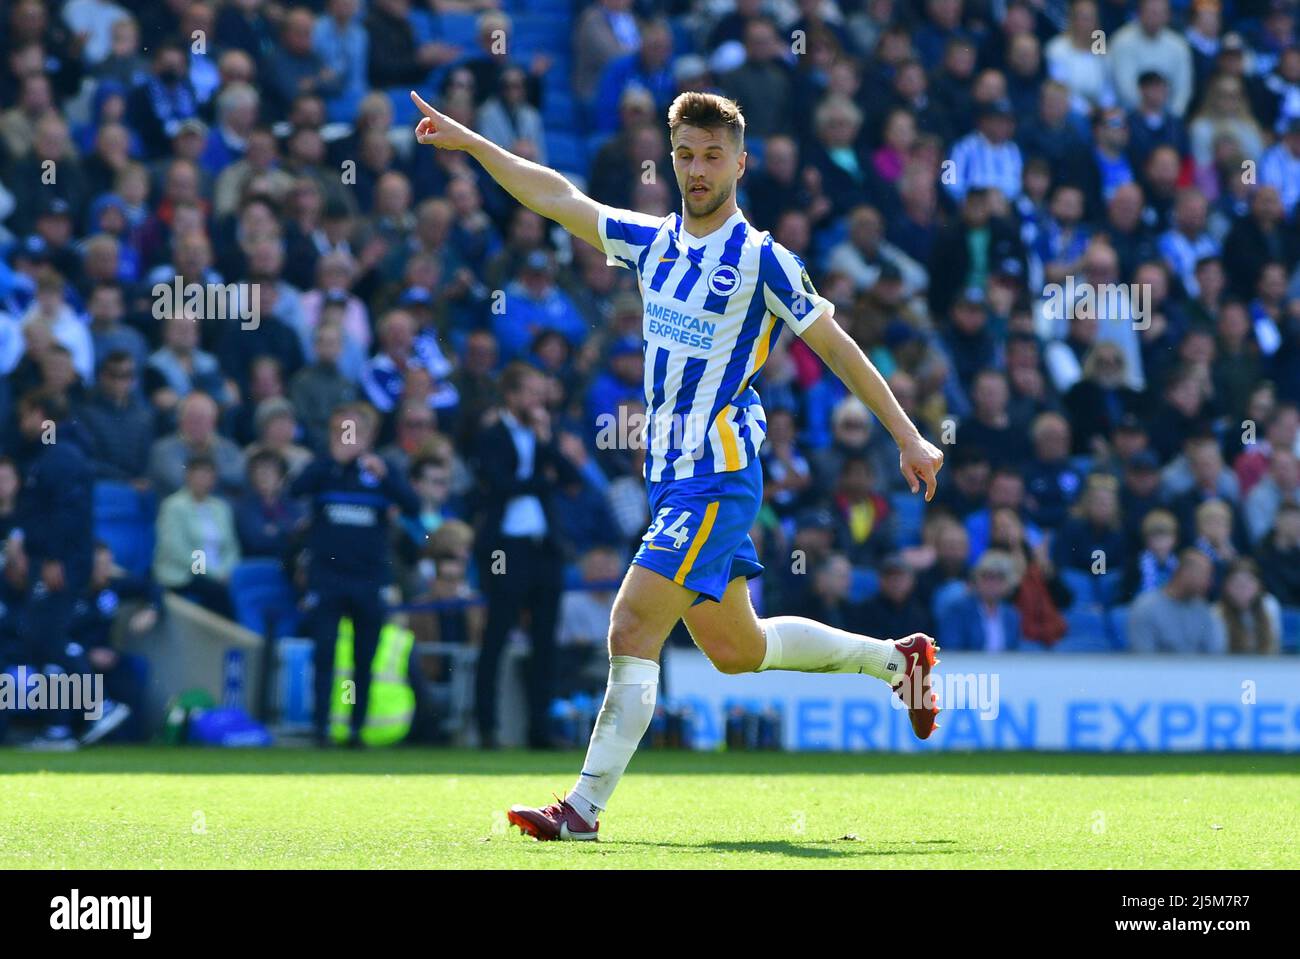 Brighton, UK. 24th Apr, 2022. Joel Veltman of Brighton and Hove Albion during the Premier League match between Brighton & Hove Albion and Southampton at The Amex on April 24th 2022 in Brighton, England. (Photo by Jeff Mood/phcimages.com) Credit: PHC Images/Alamy Live News Stock Photo